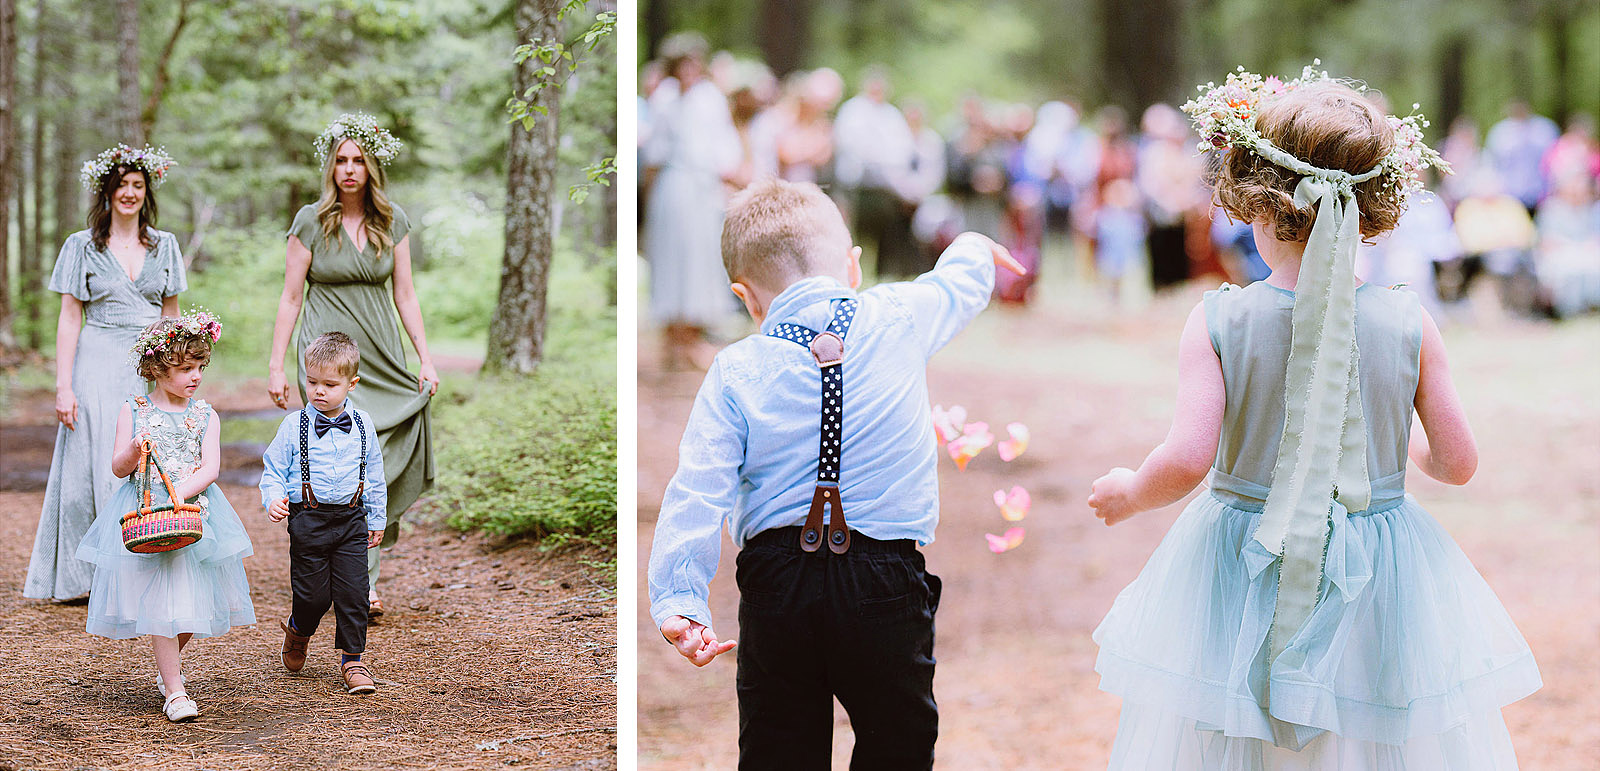 Flower girl and ring bearer dropping petals along the forest path - Trout Lake Wedding, WA